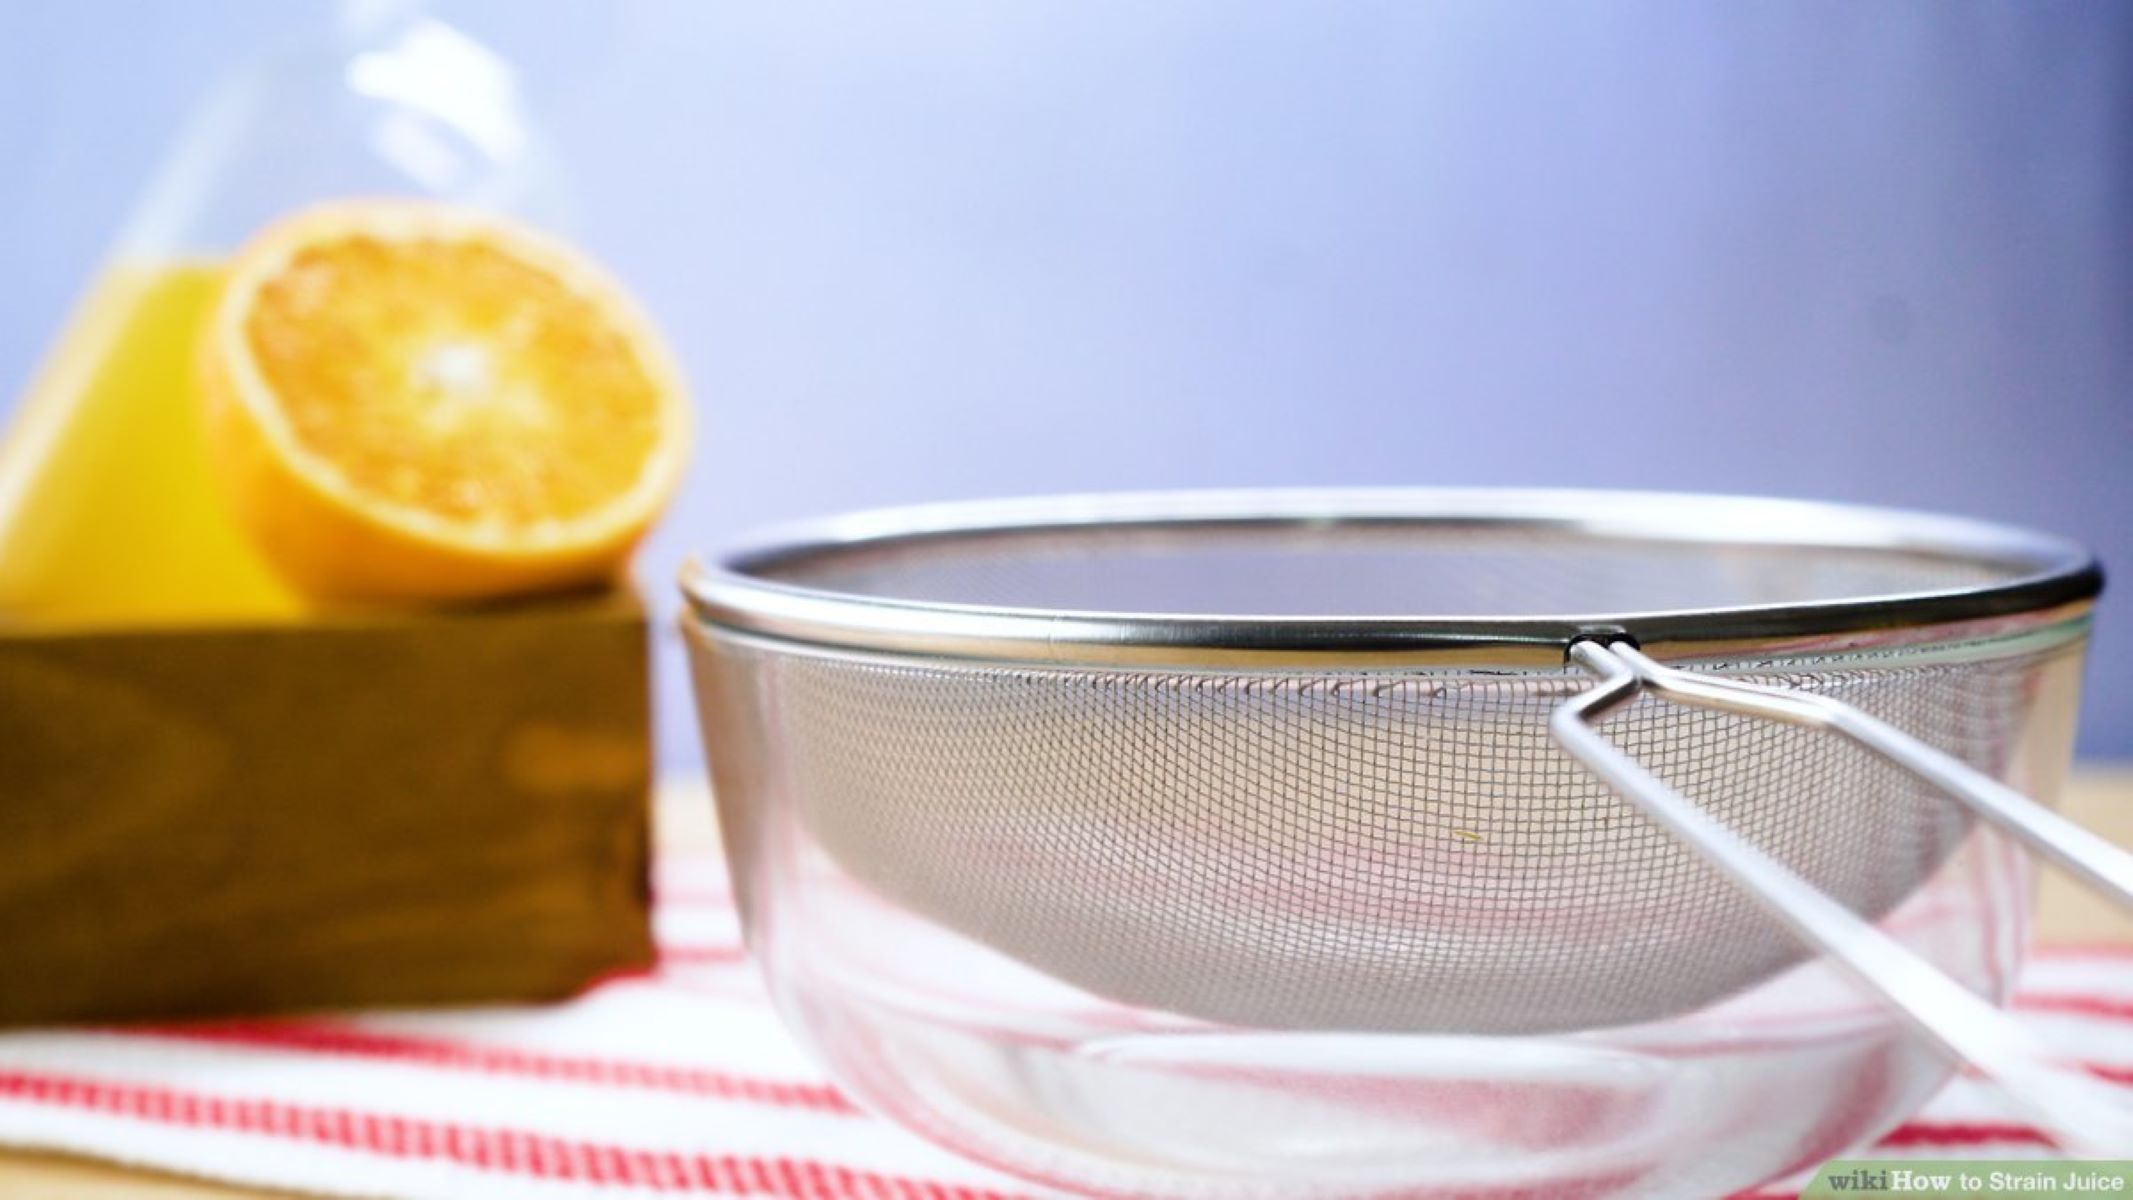 How To Strain Juice Without A Strainer